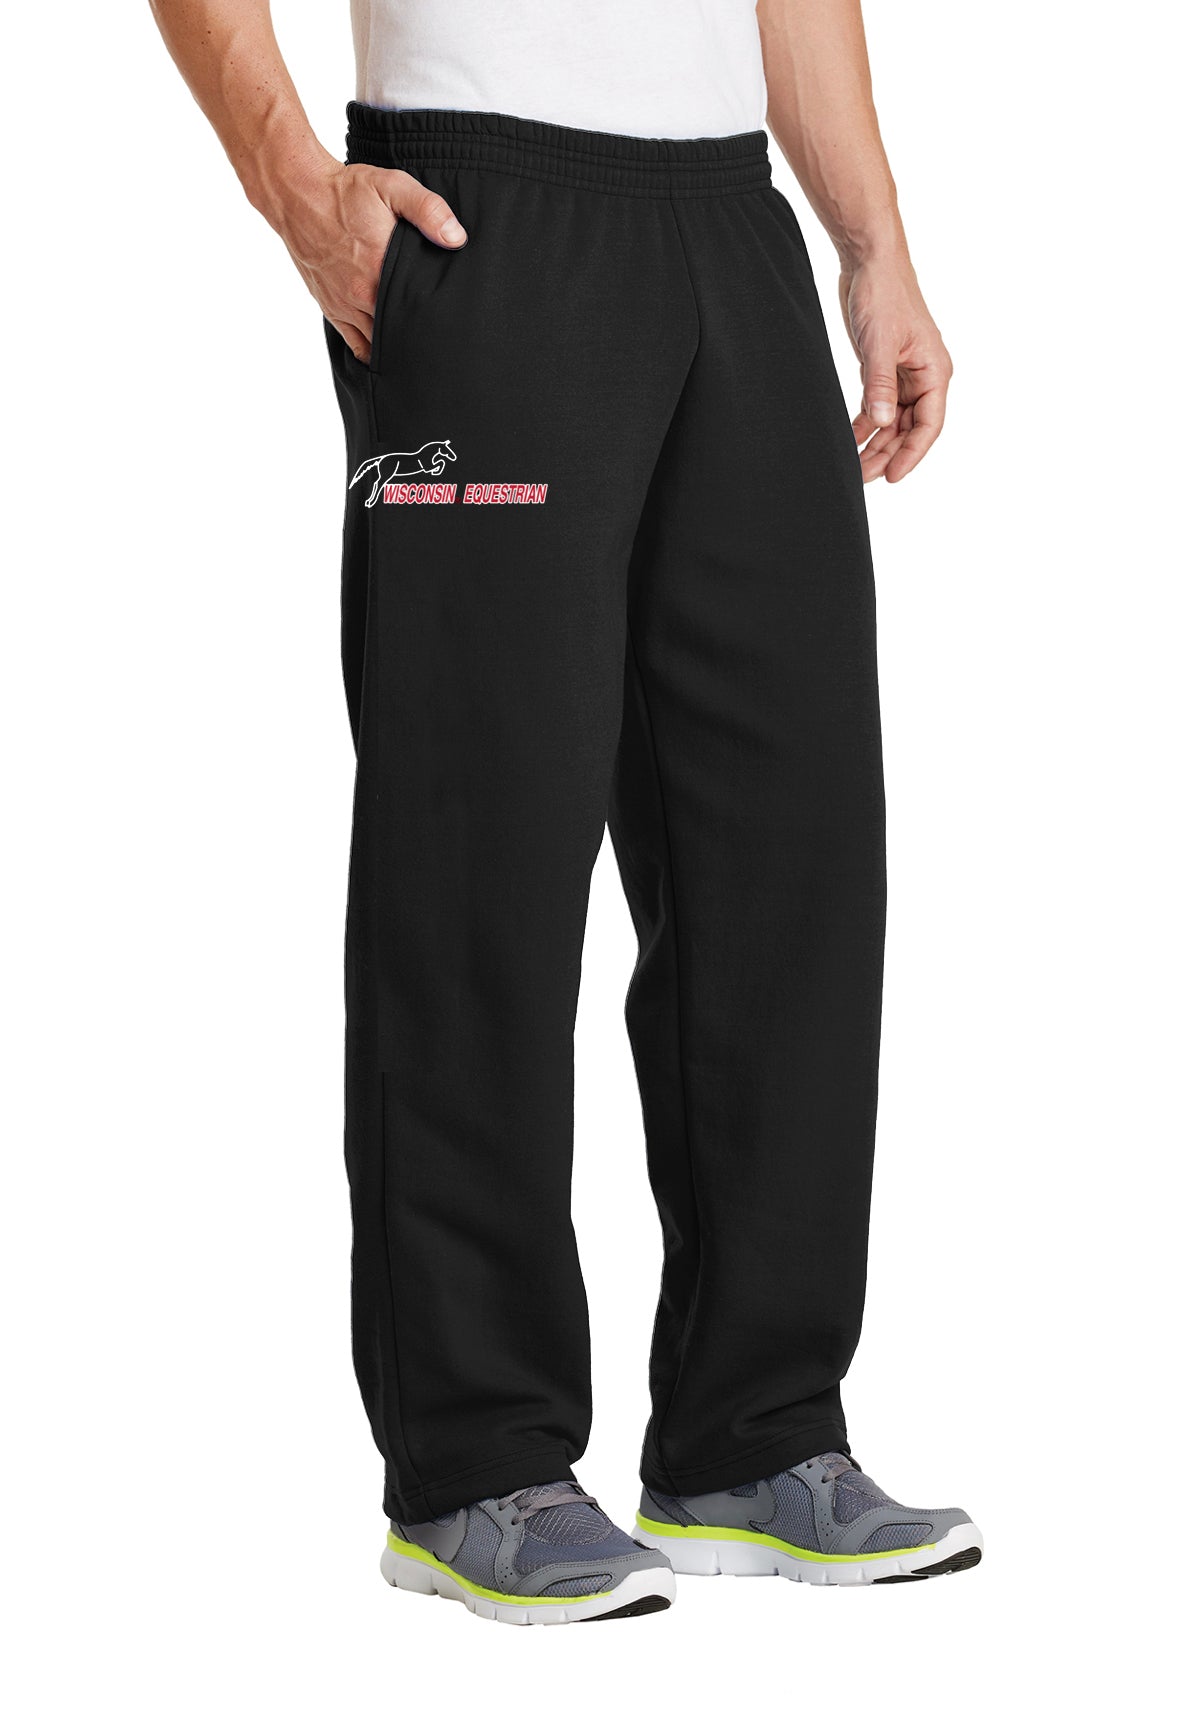 Wisconsin Equestrian Team Core Fleece Sweatpant with Pockets (Unisex) - Black or Charcoal